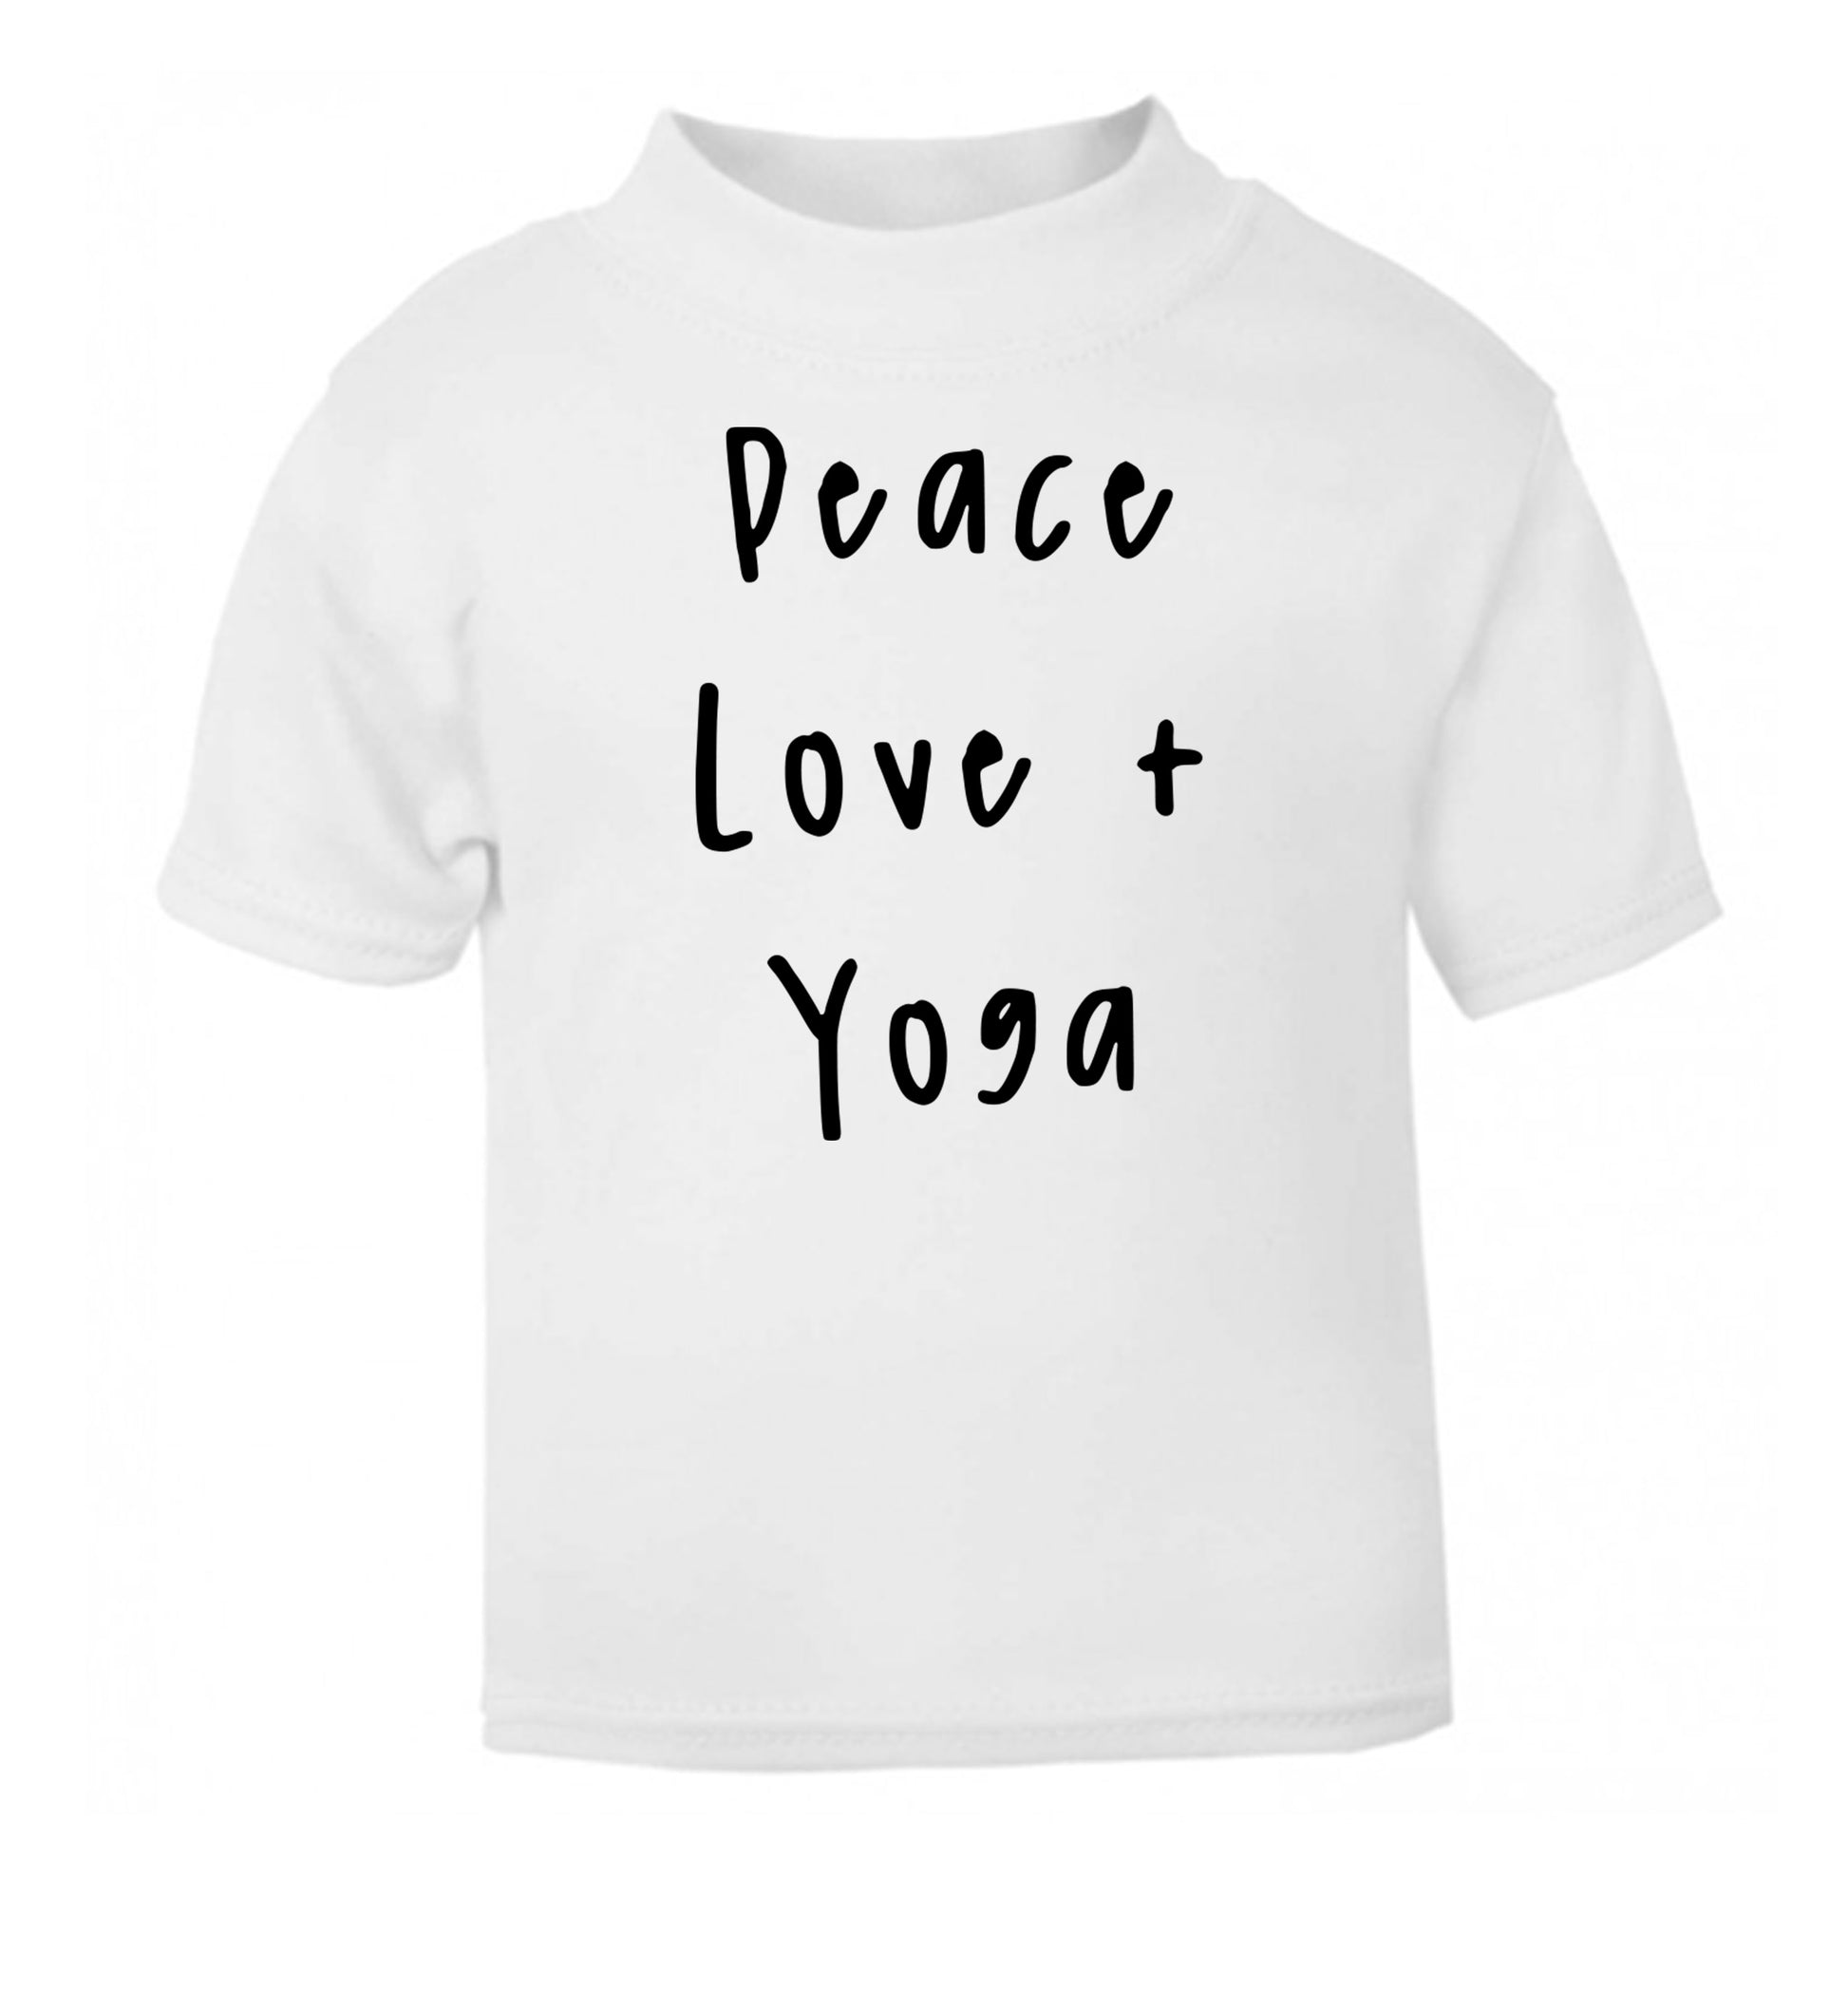 Peace love and yoga white Baby Toddler Tshirt 2 Years